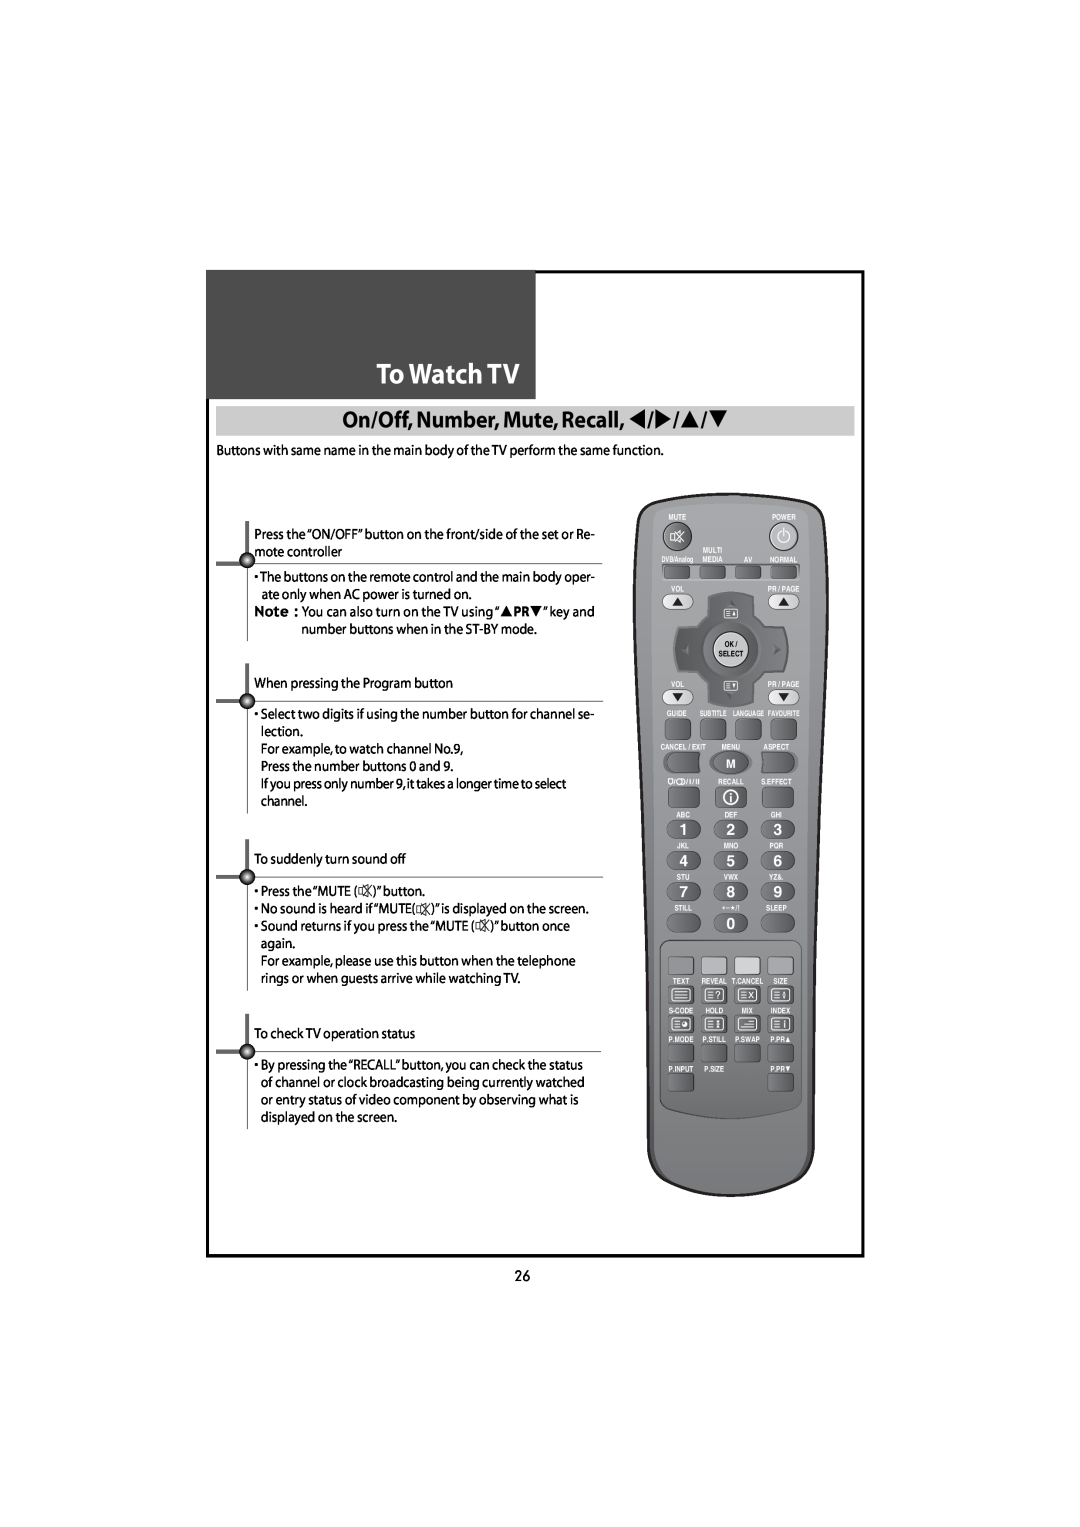 Daewoo DLT-46U1HZ, DLT-42U1/G1FH, DLT-46U1FH, DLT-42U1/G1HZ instruction manual ToWatchTV, On/Off,Number,Mute,Recall 